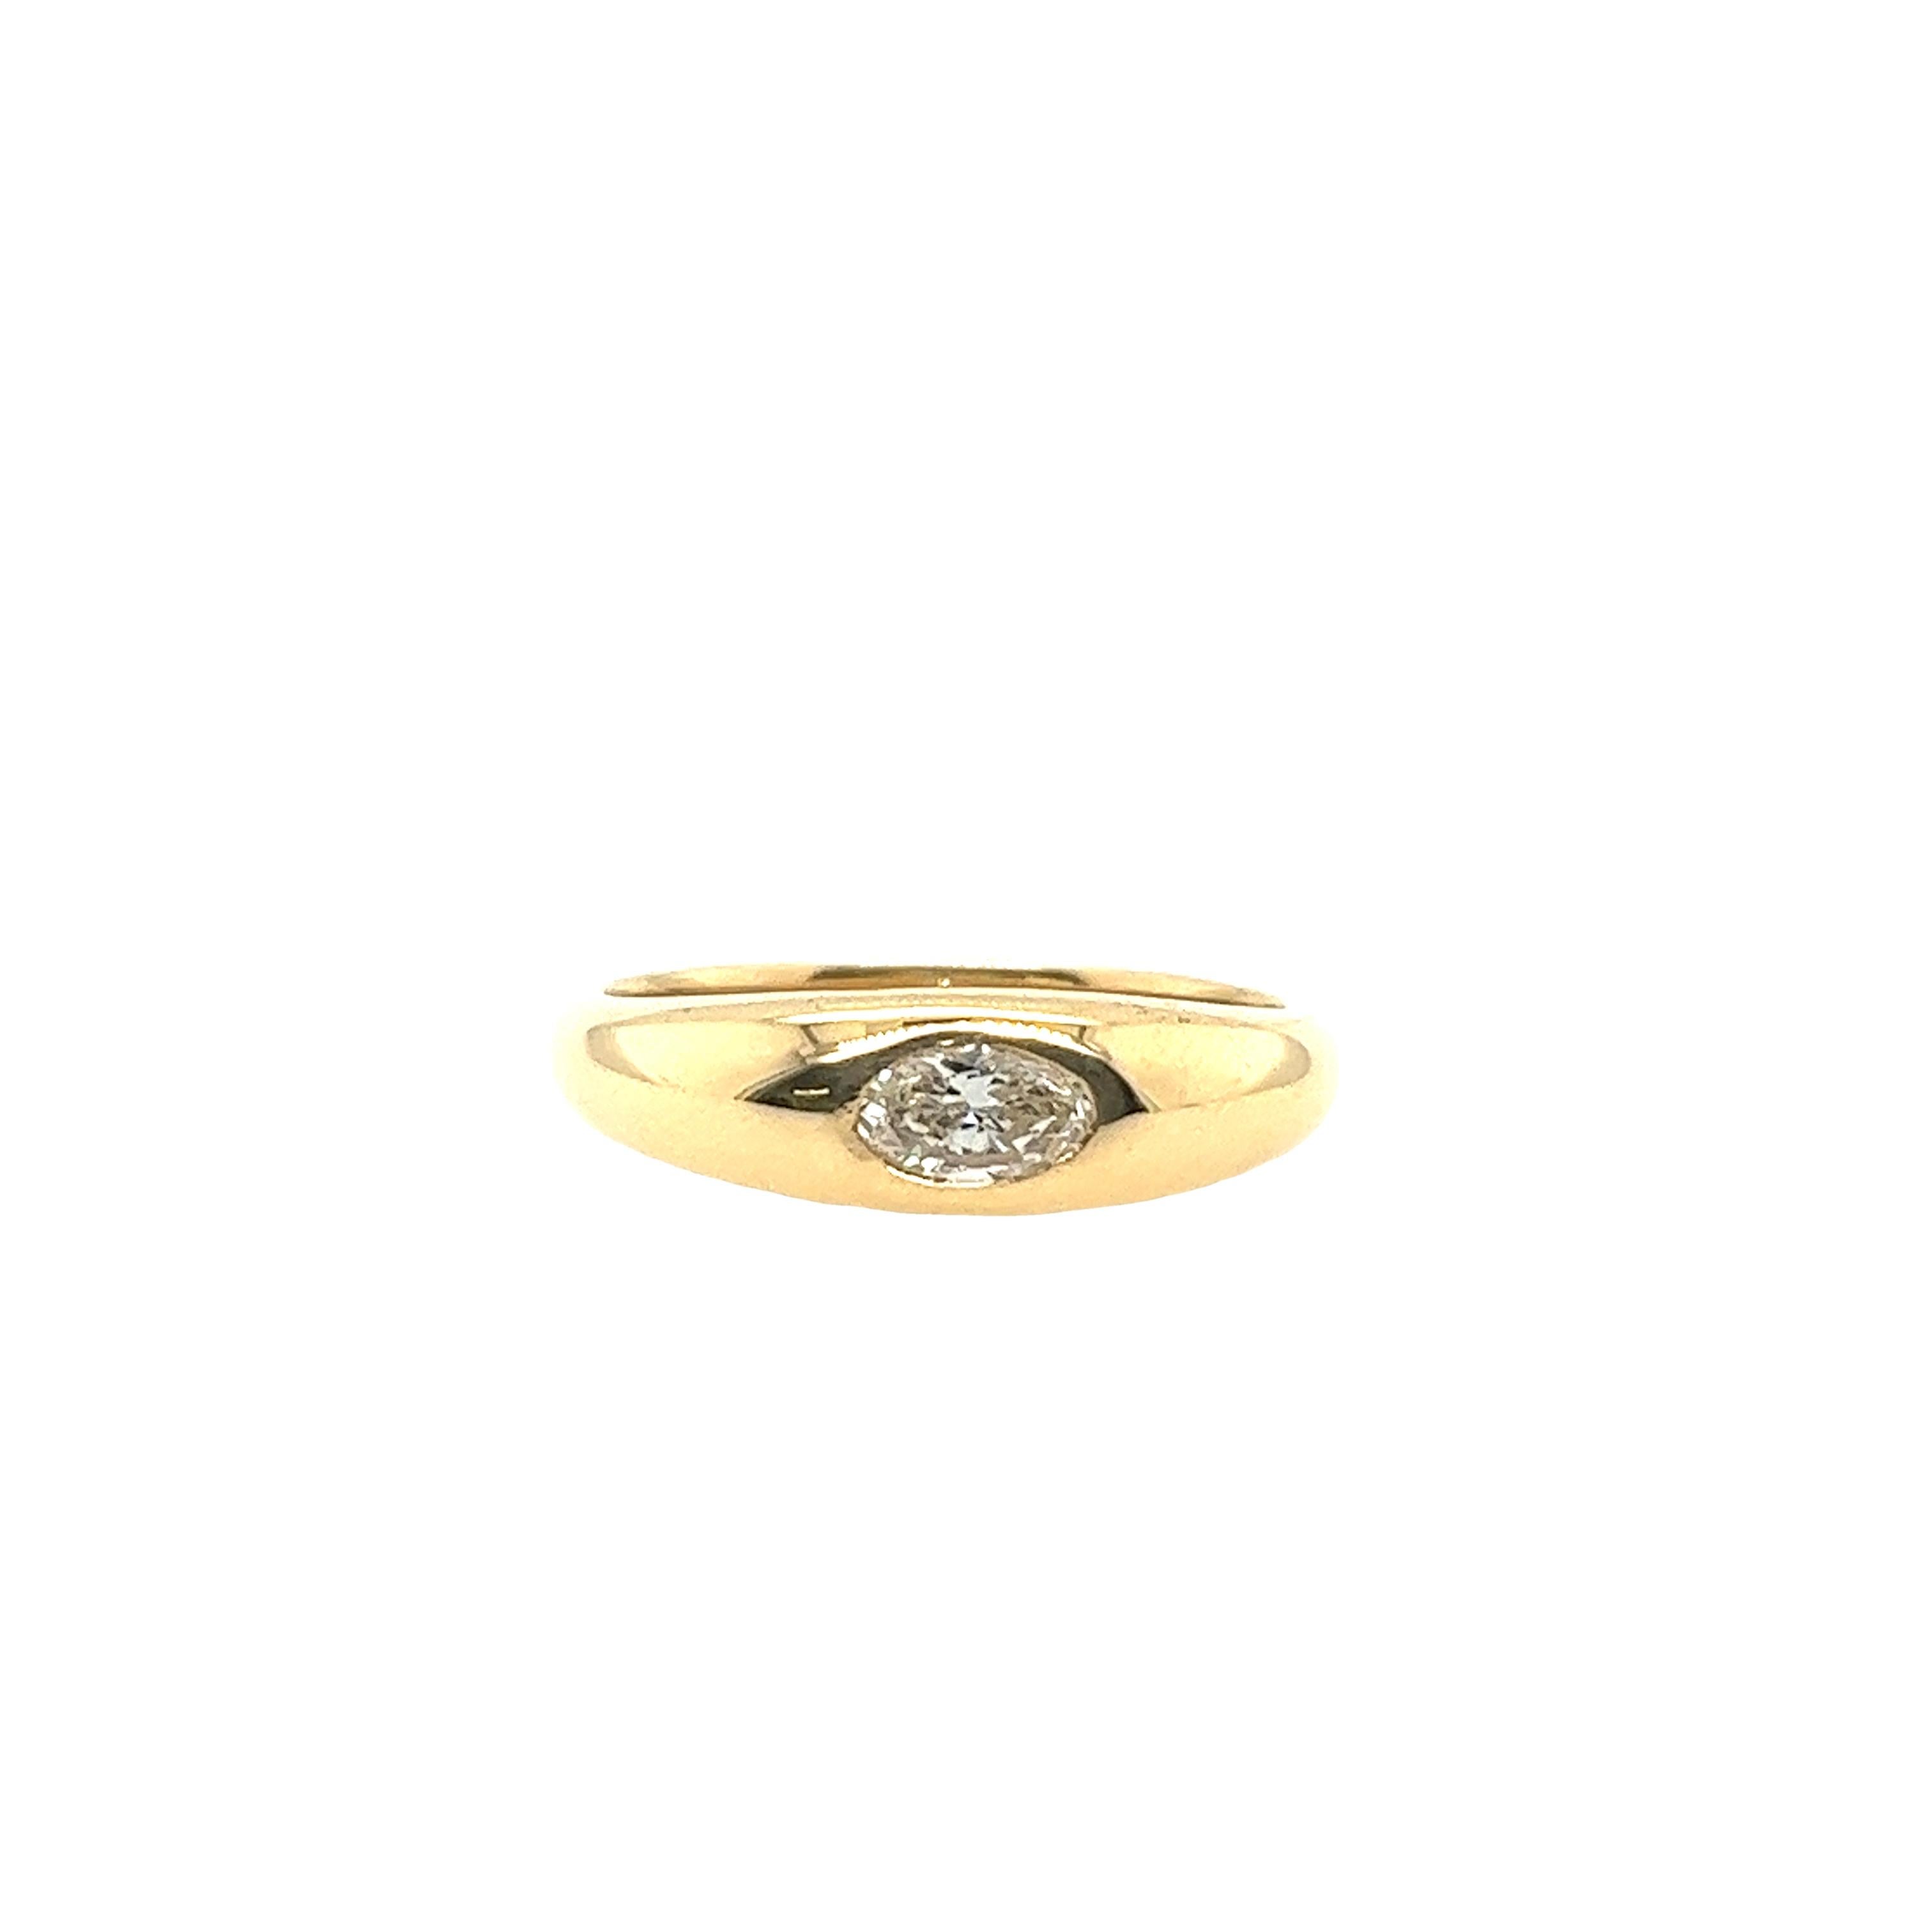 Modern 18ct Yellow Gold Diamond Ring, Set With 0.30ct Natural Oval Diamond G-H/VS For Sale